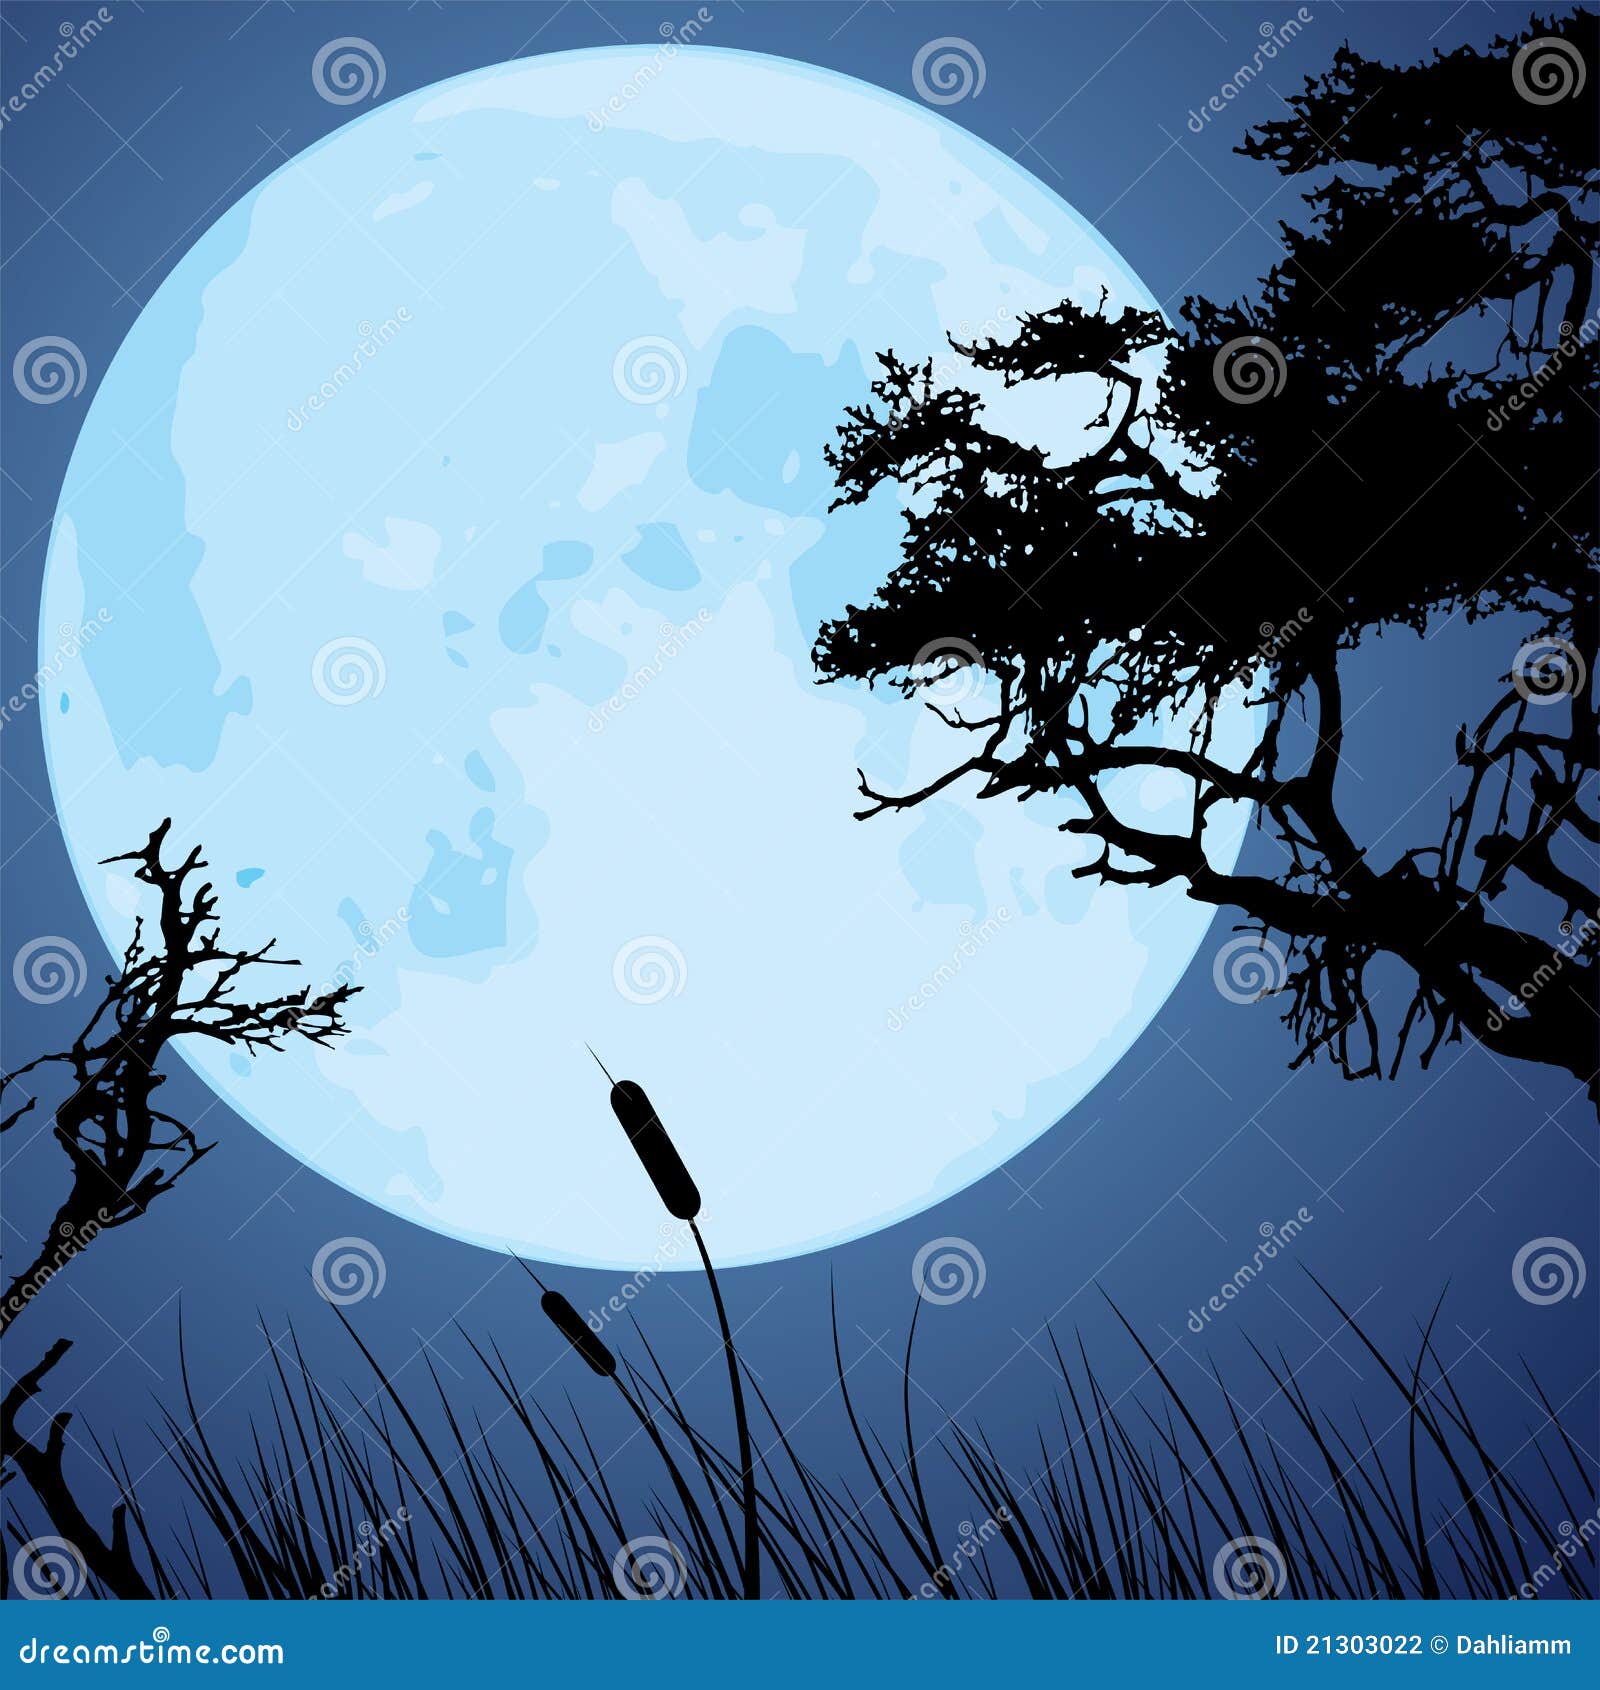 Moon and Silhouettes of Tree Branches Stock Vector - Illustration of